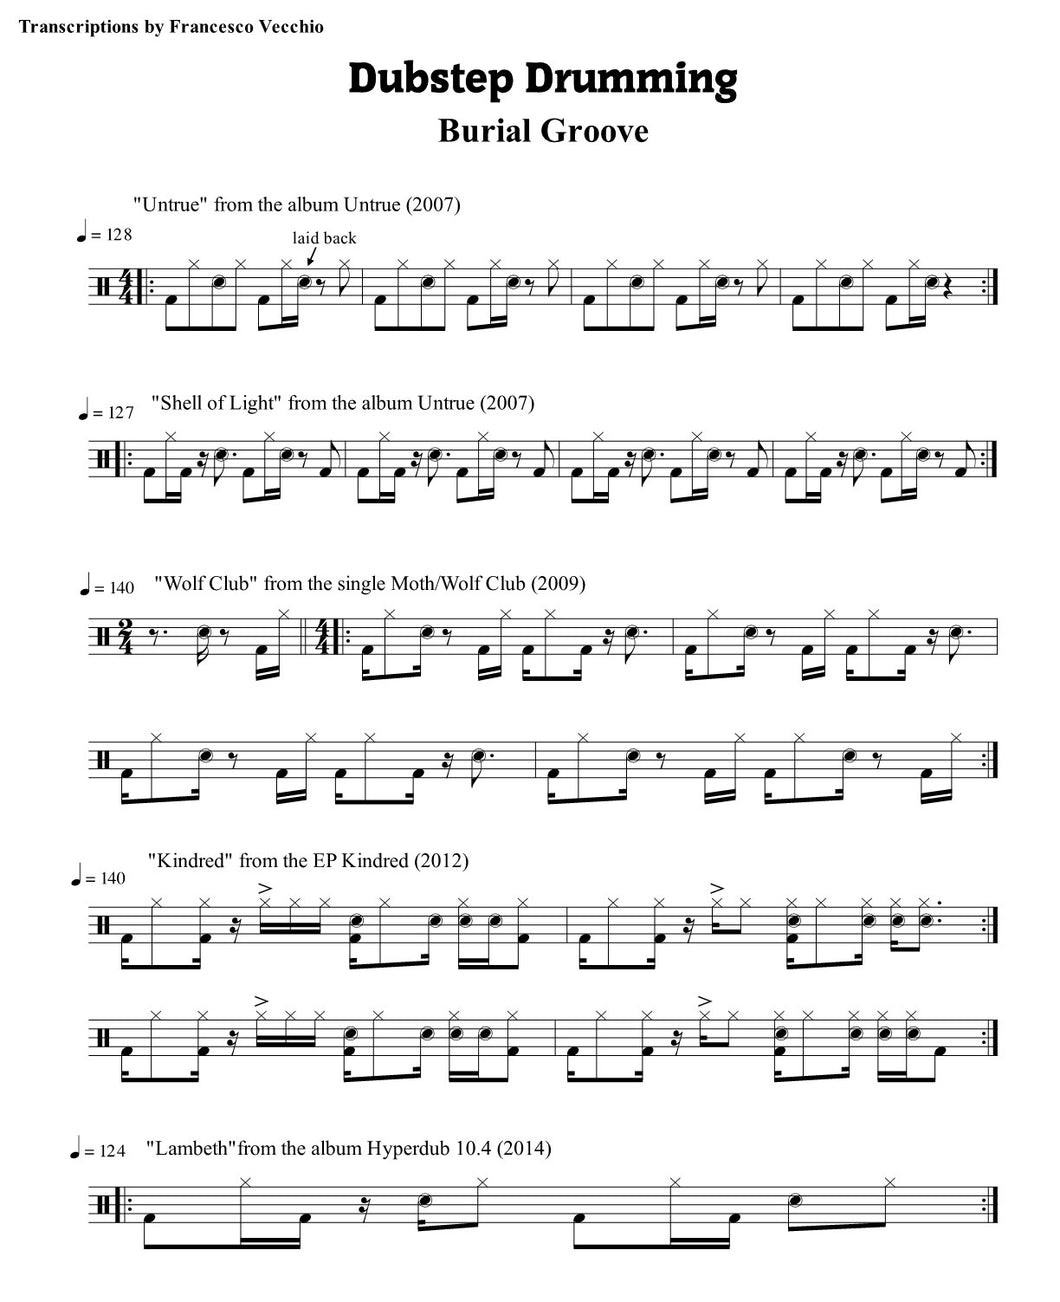 Shell of Light - Burial - Collection of Drum Transcriptions / Drum Sheet Music - FrancisDrummingBlog.com